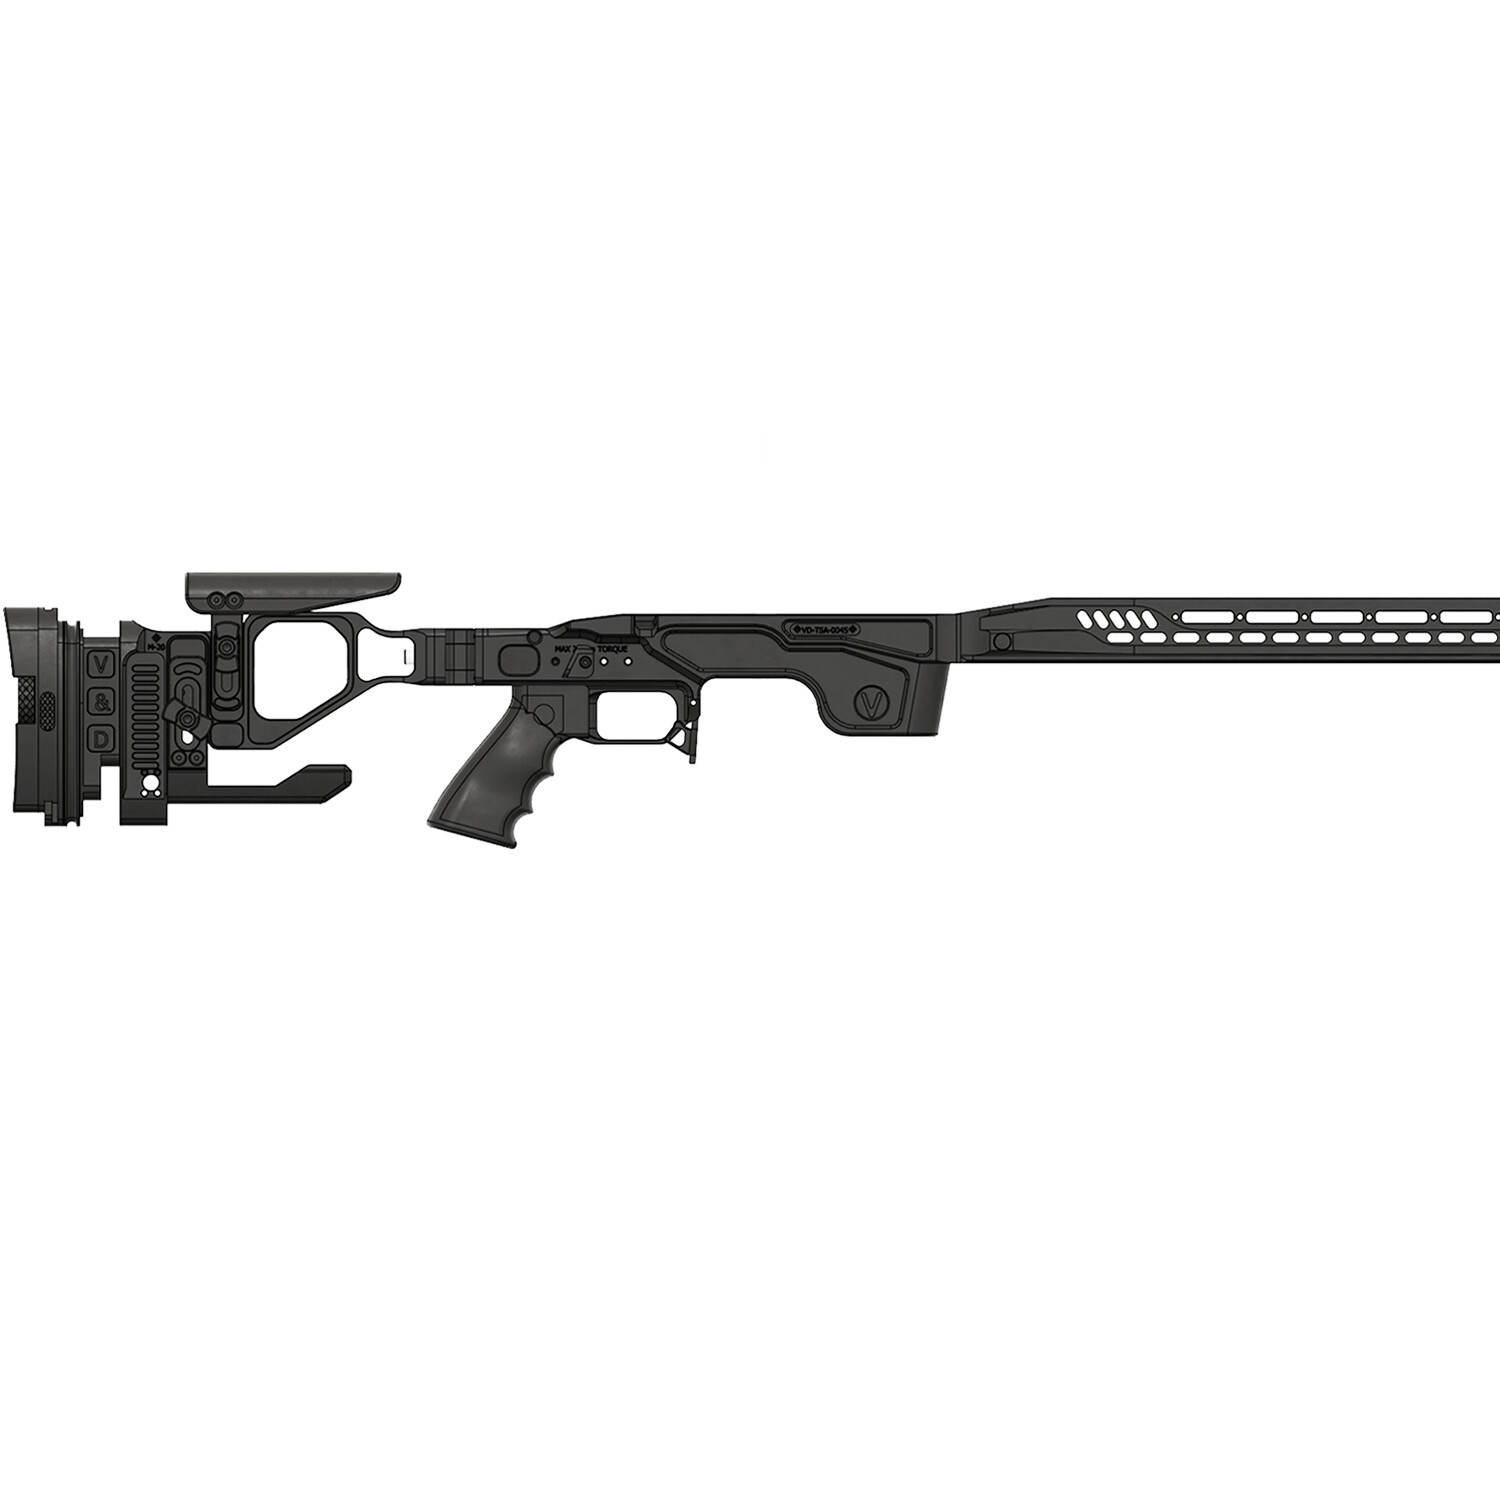 Vision & Design Chassis for Tikka T3 CTR with Competition Mid Length Frontguard